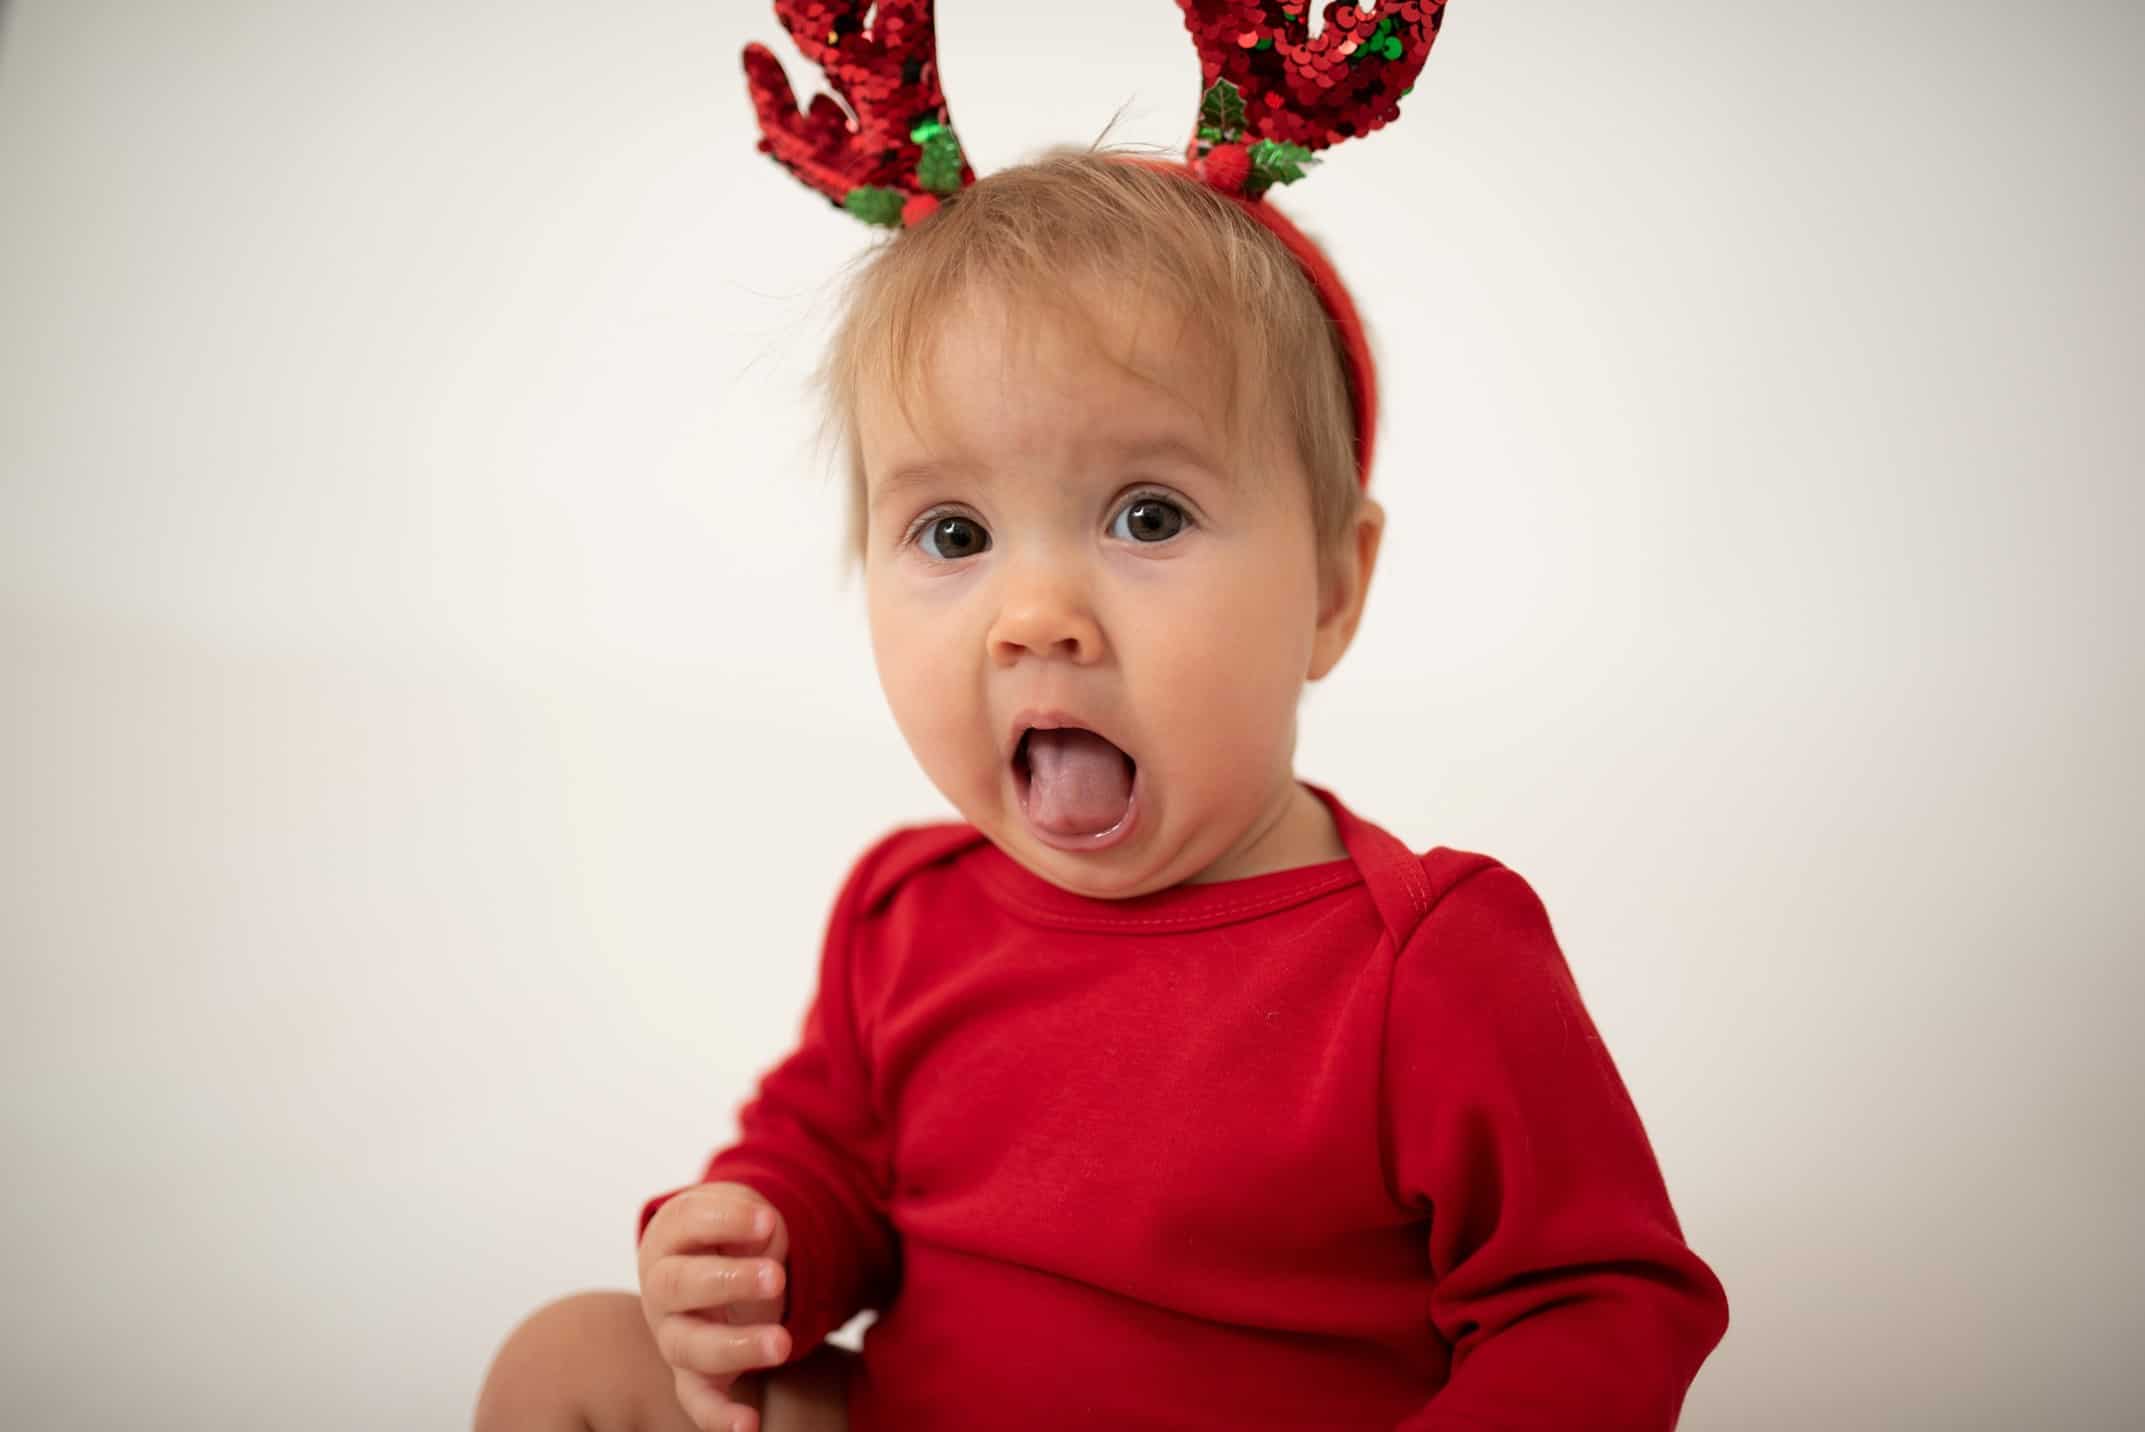 A baby in Christmas clothes